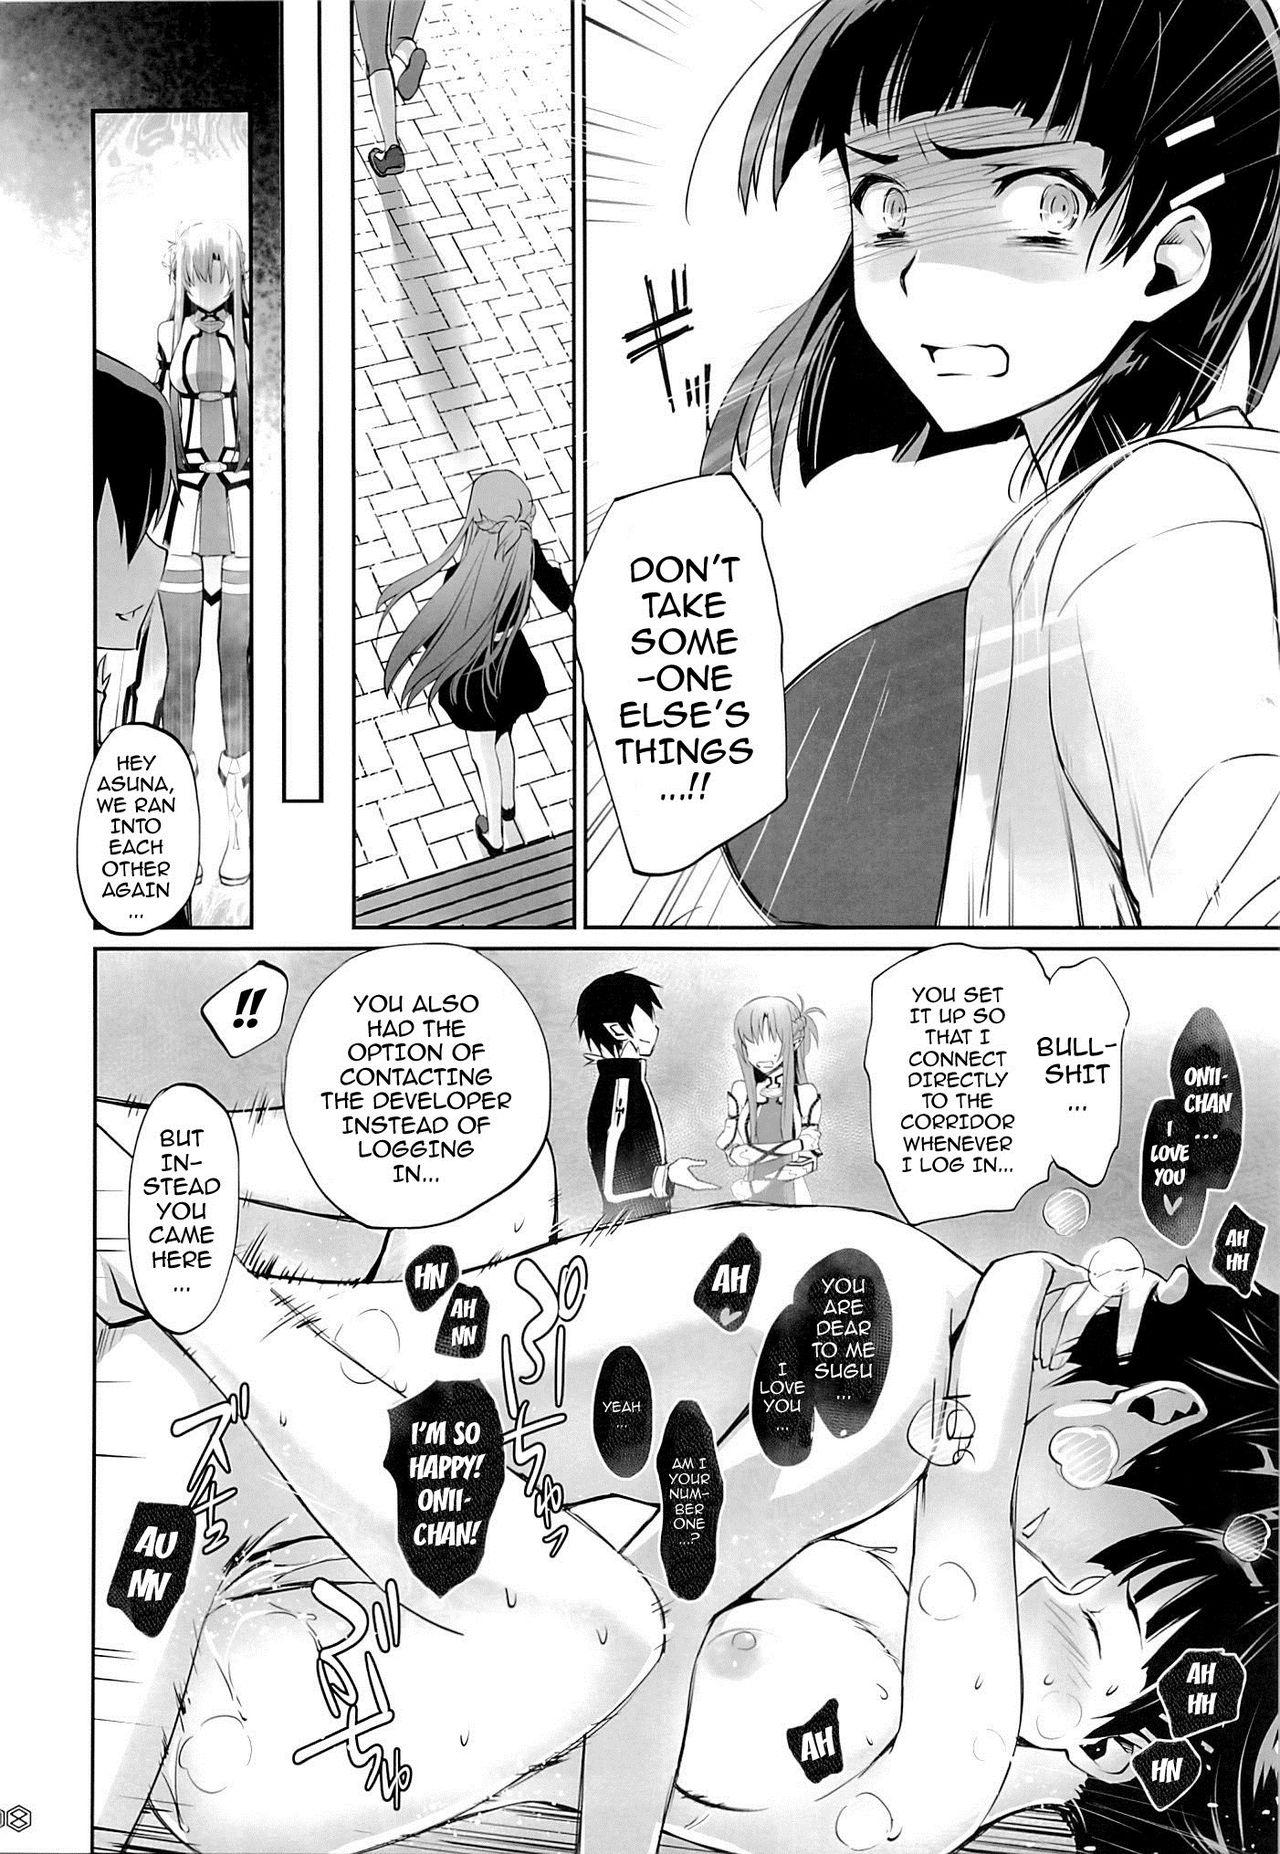 Spy turnover - Sword art online Hairypussy - Page 7